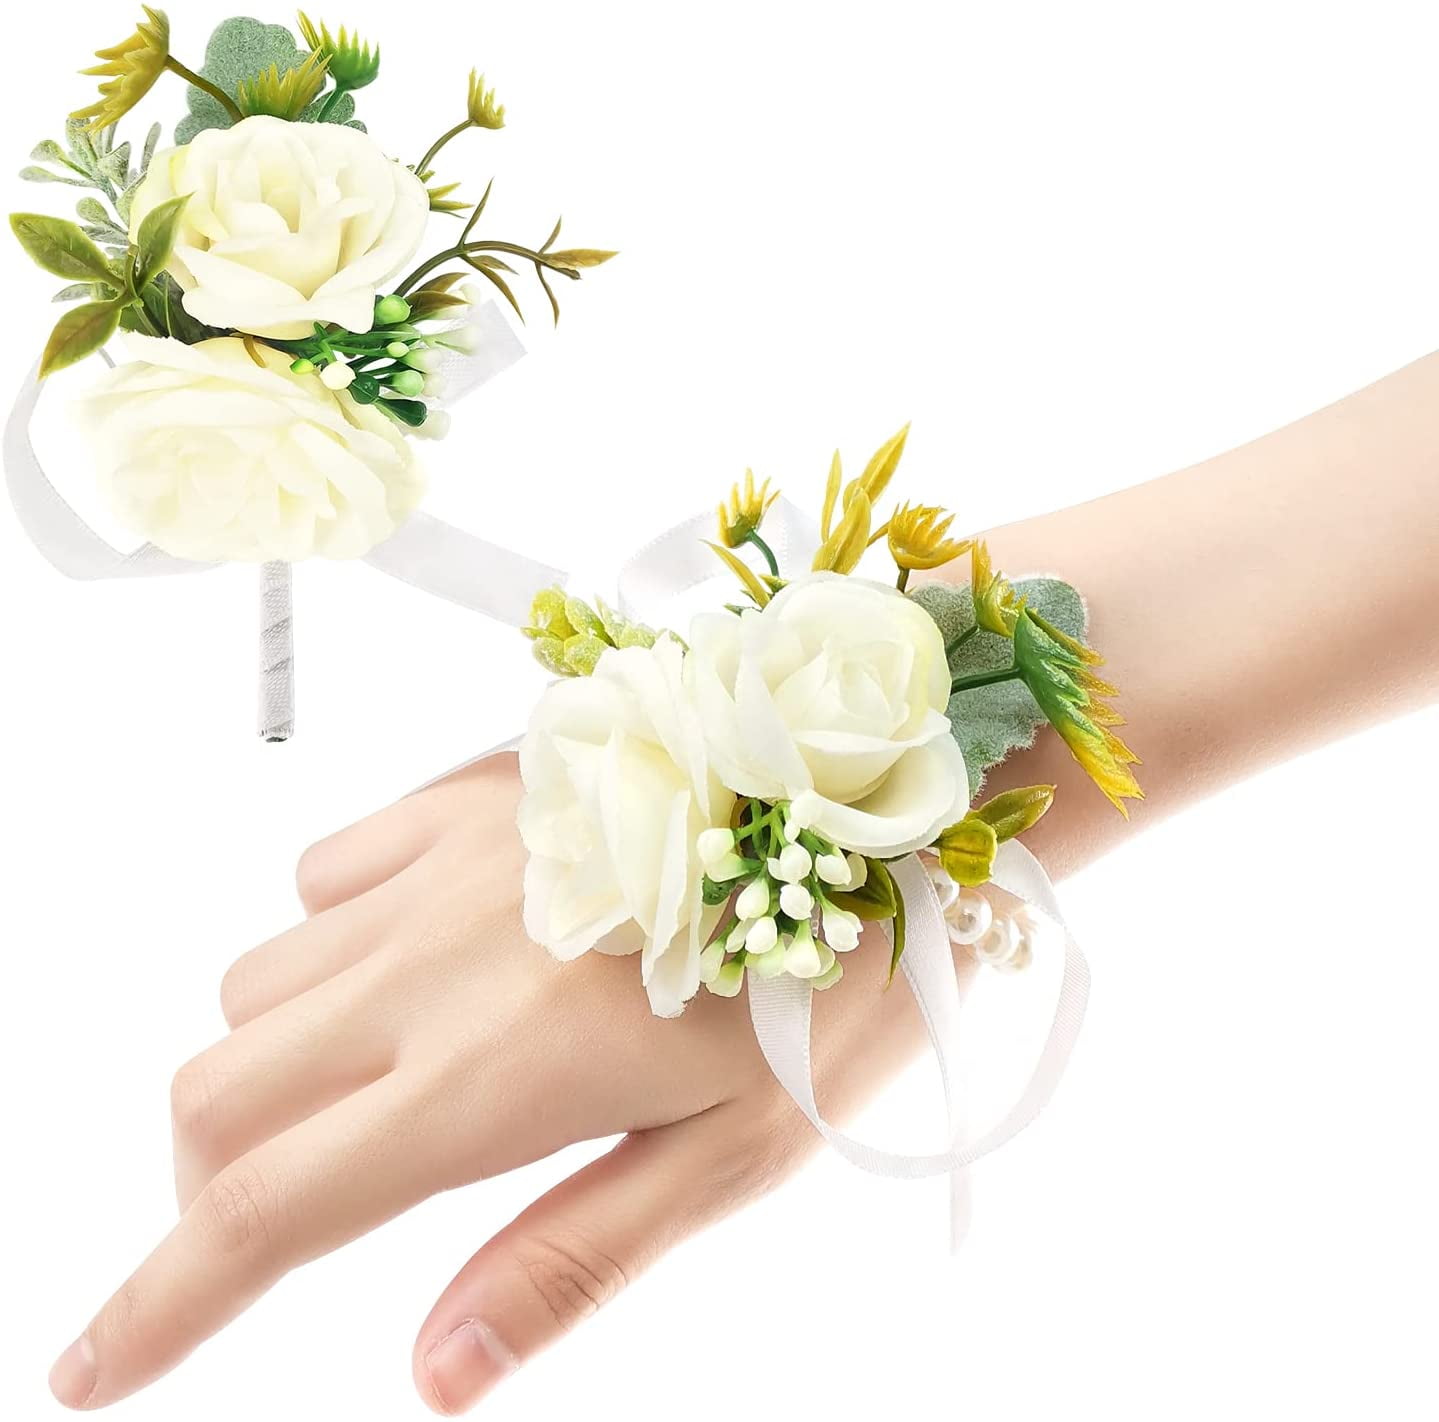 oasis wrap wristlets one size fits all for wrist corsage choose colour & amount 